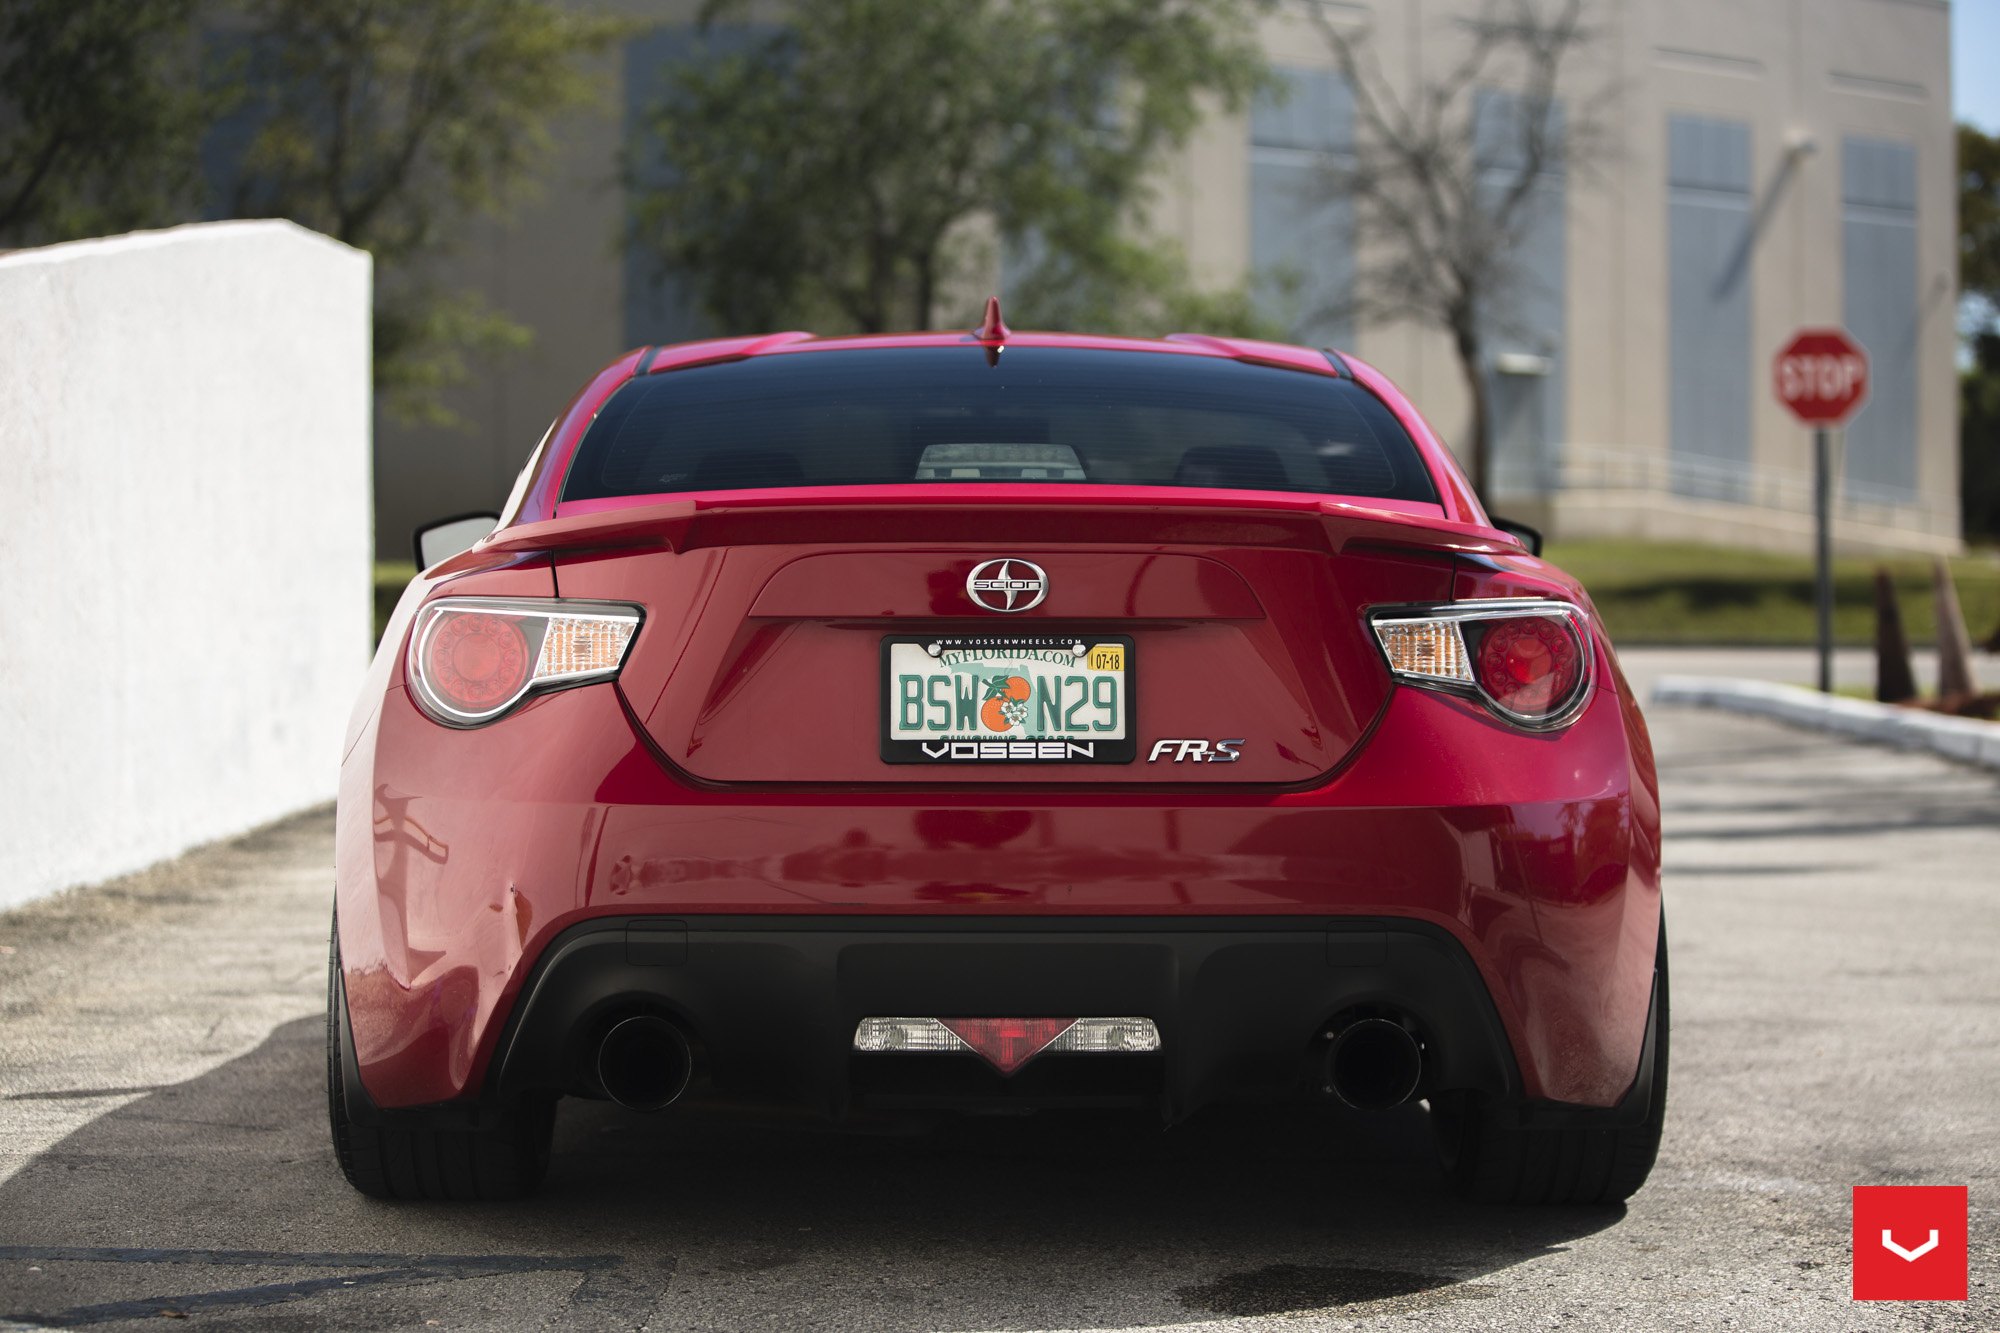 Aftermarket Rear Diffuser on Red Scion FRS - Photo by Vossen